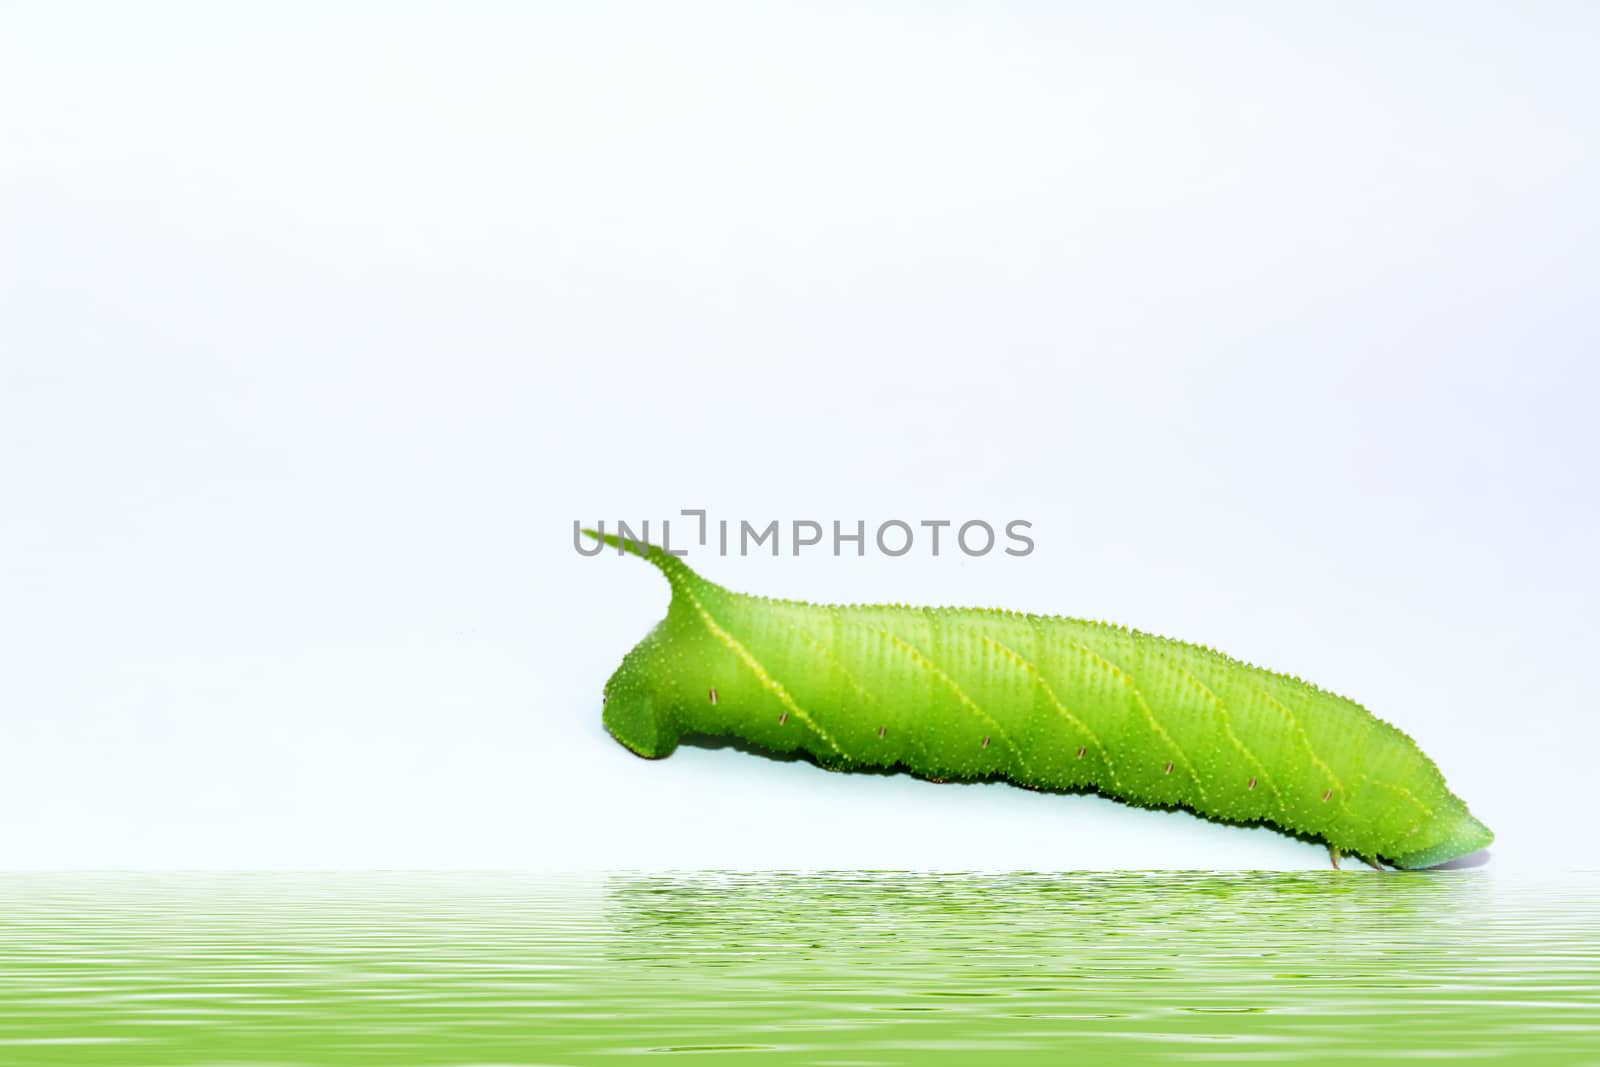 A close up of the green caterpillar by dinhngochung